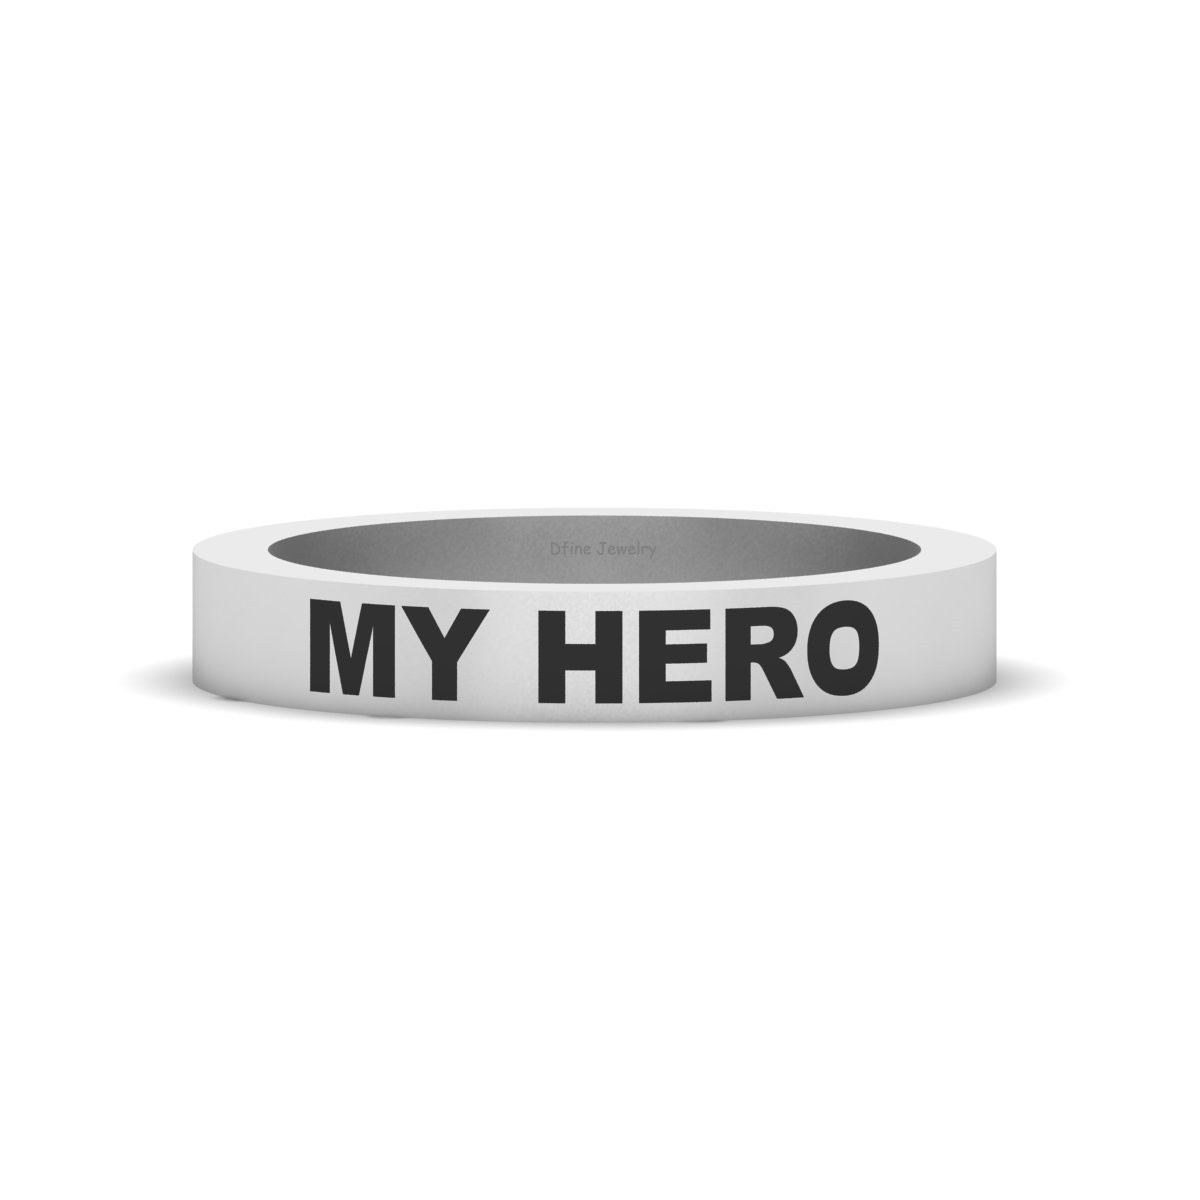 MY HERO Ring Band Anniversary Gift For Husband Father Daughter Ring Gift Unisex